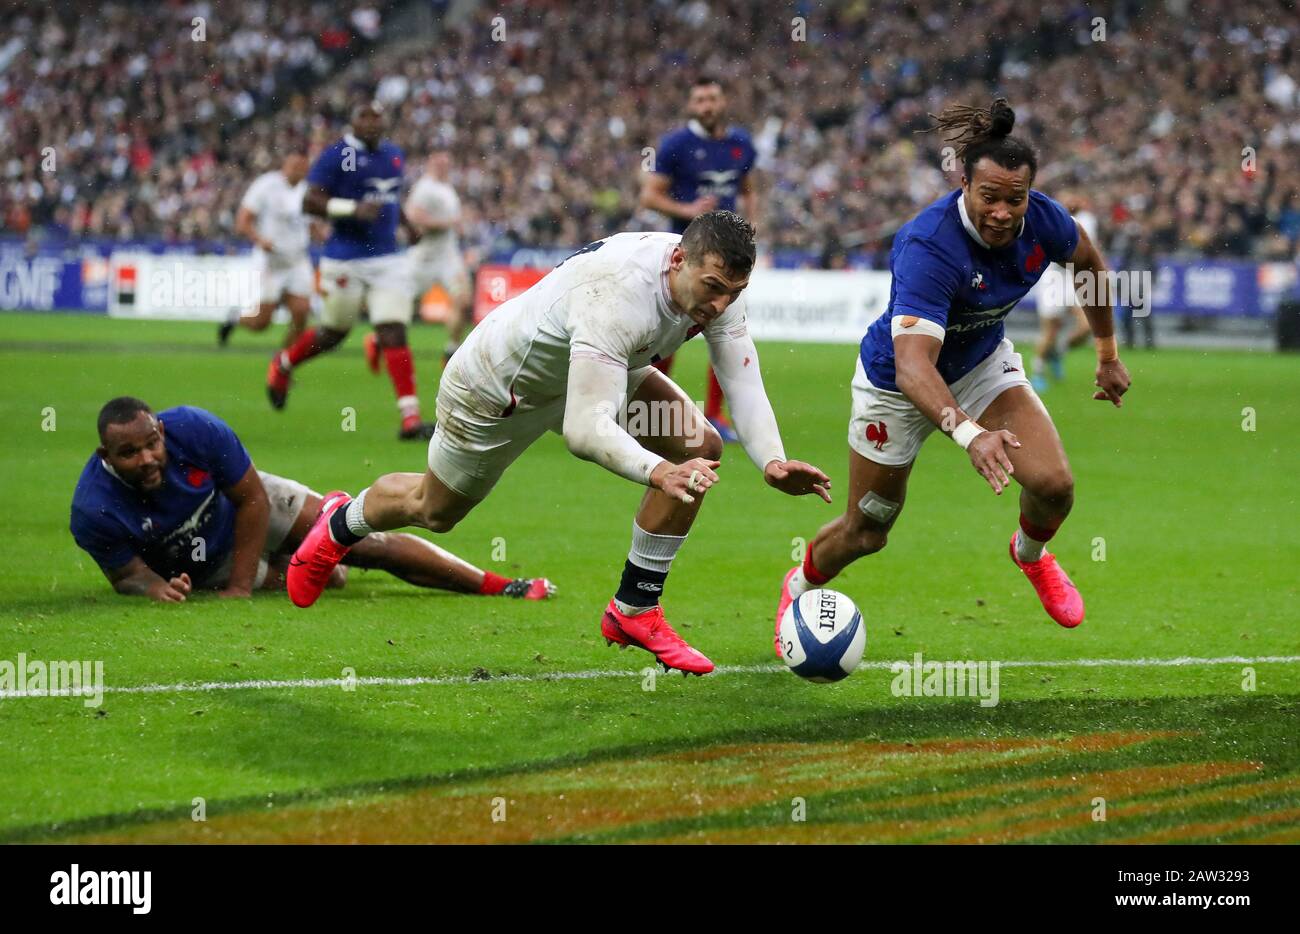 Jonny May of England scores their first try and points of the game France v  England, Guinness 6 Nations Rugby Union, Stade de France, St. Denis, Pa  Stock Photo - Alamy